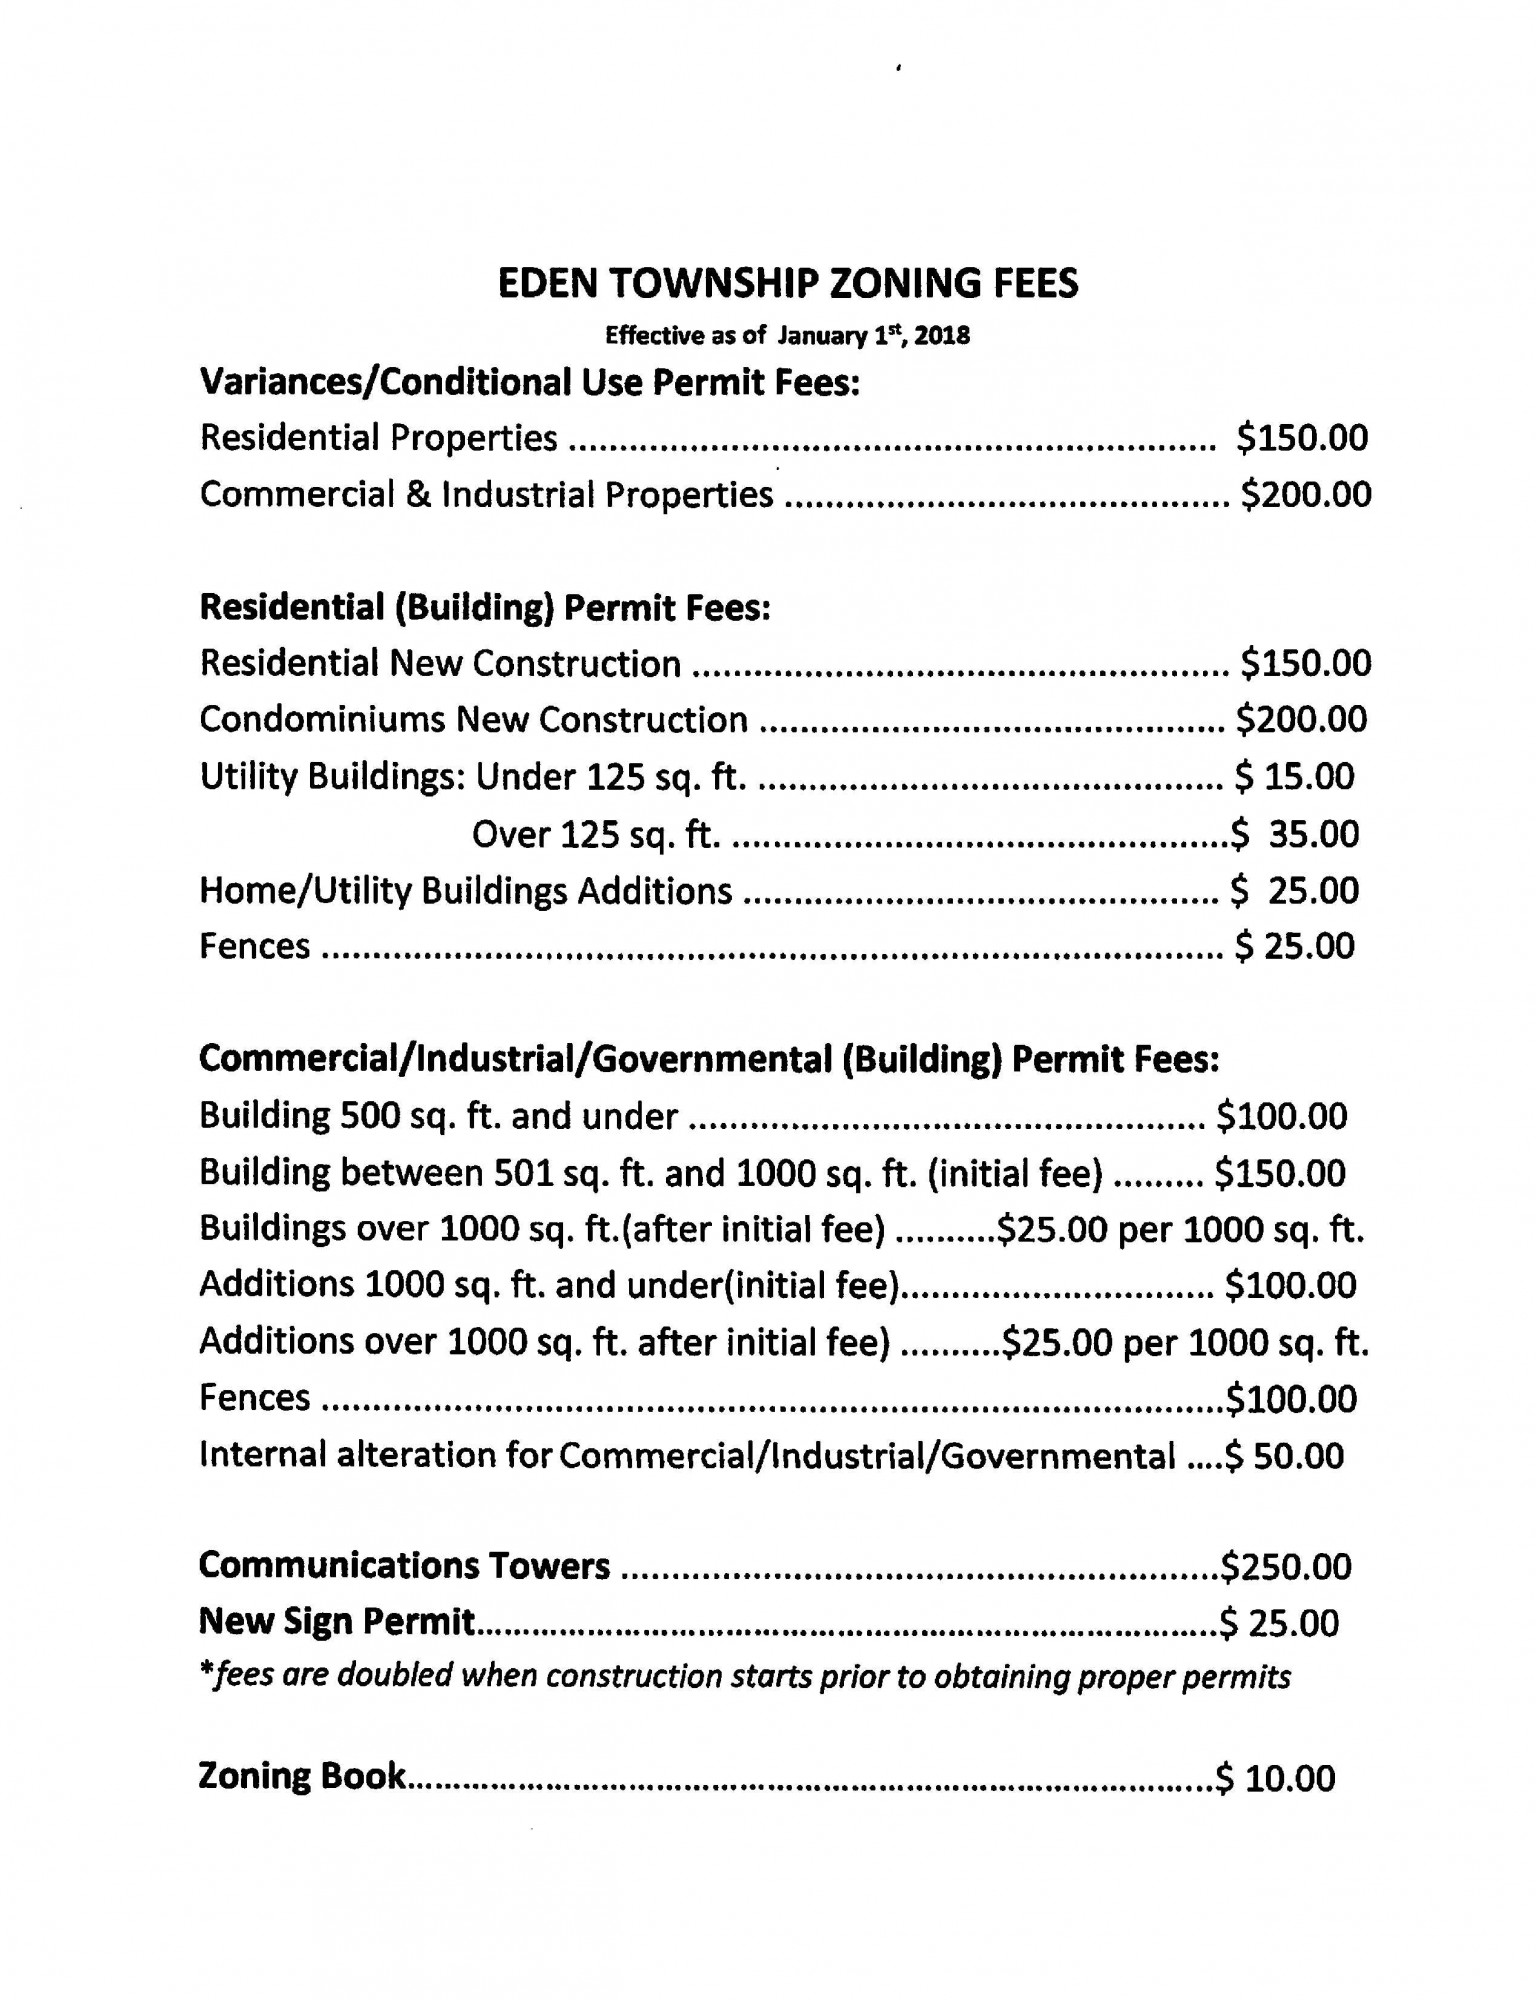 Eden Township Zoning Fees as of 01/01/2018